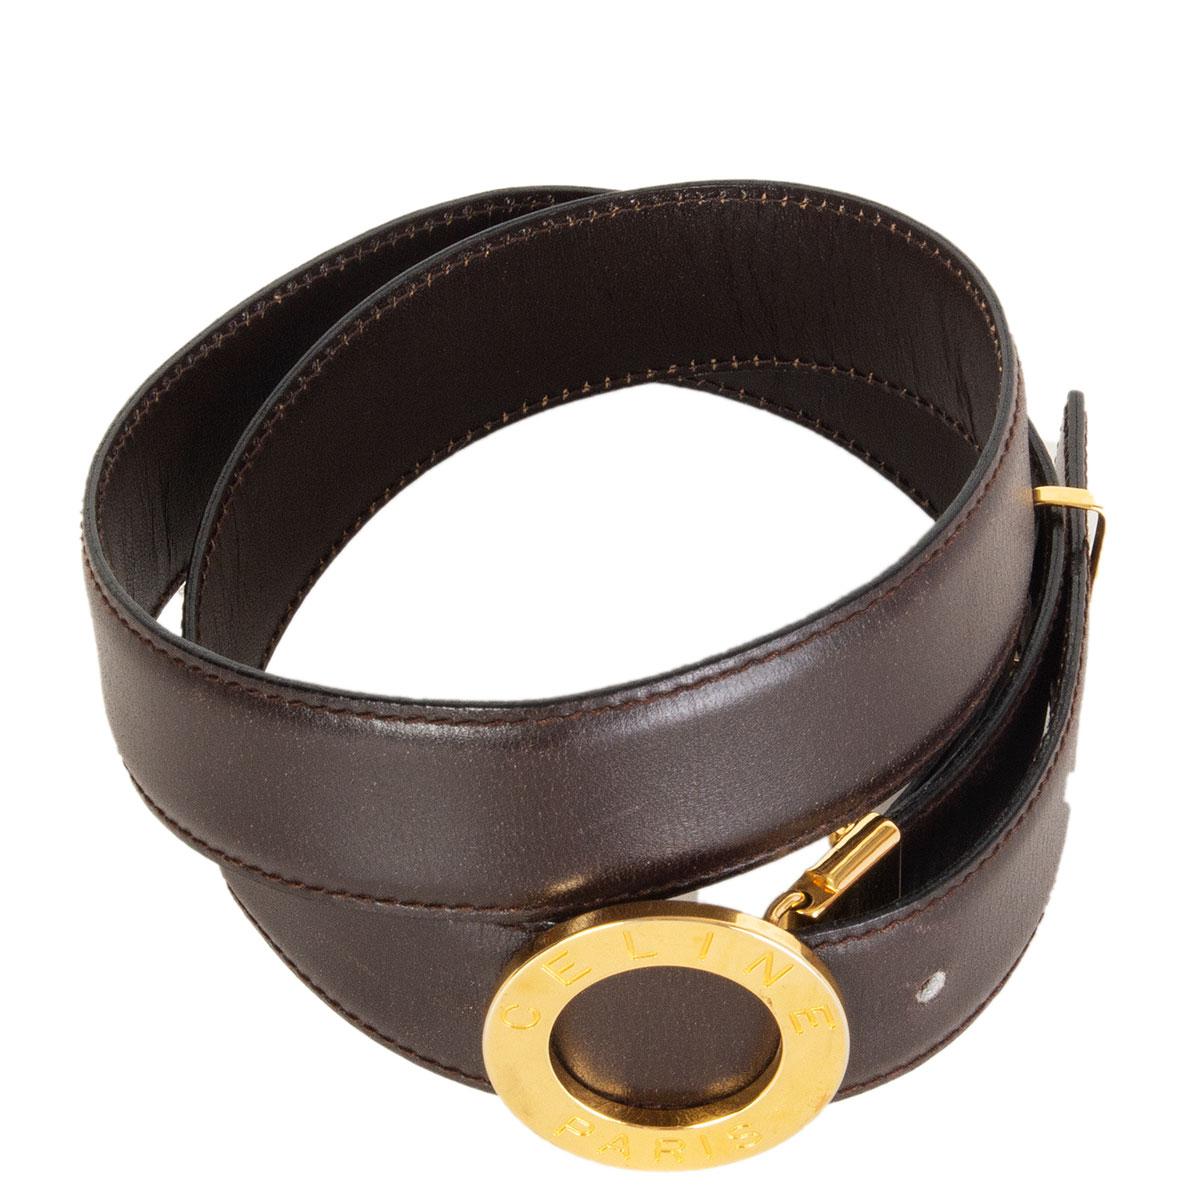 100% authentic Celine belt in espresso brown leather with round logo embossed gold-tone metal buckle. Has been worn with some scretches on the buckle. Overall in very good condition. 

Tag Size
70

Width 3cm (1.2in)
Fits 67cm (26.1in) to 77cm